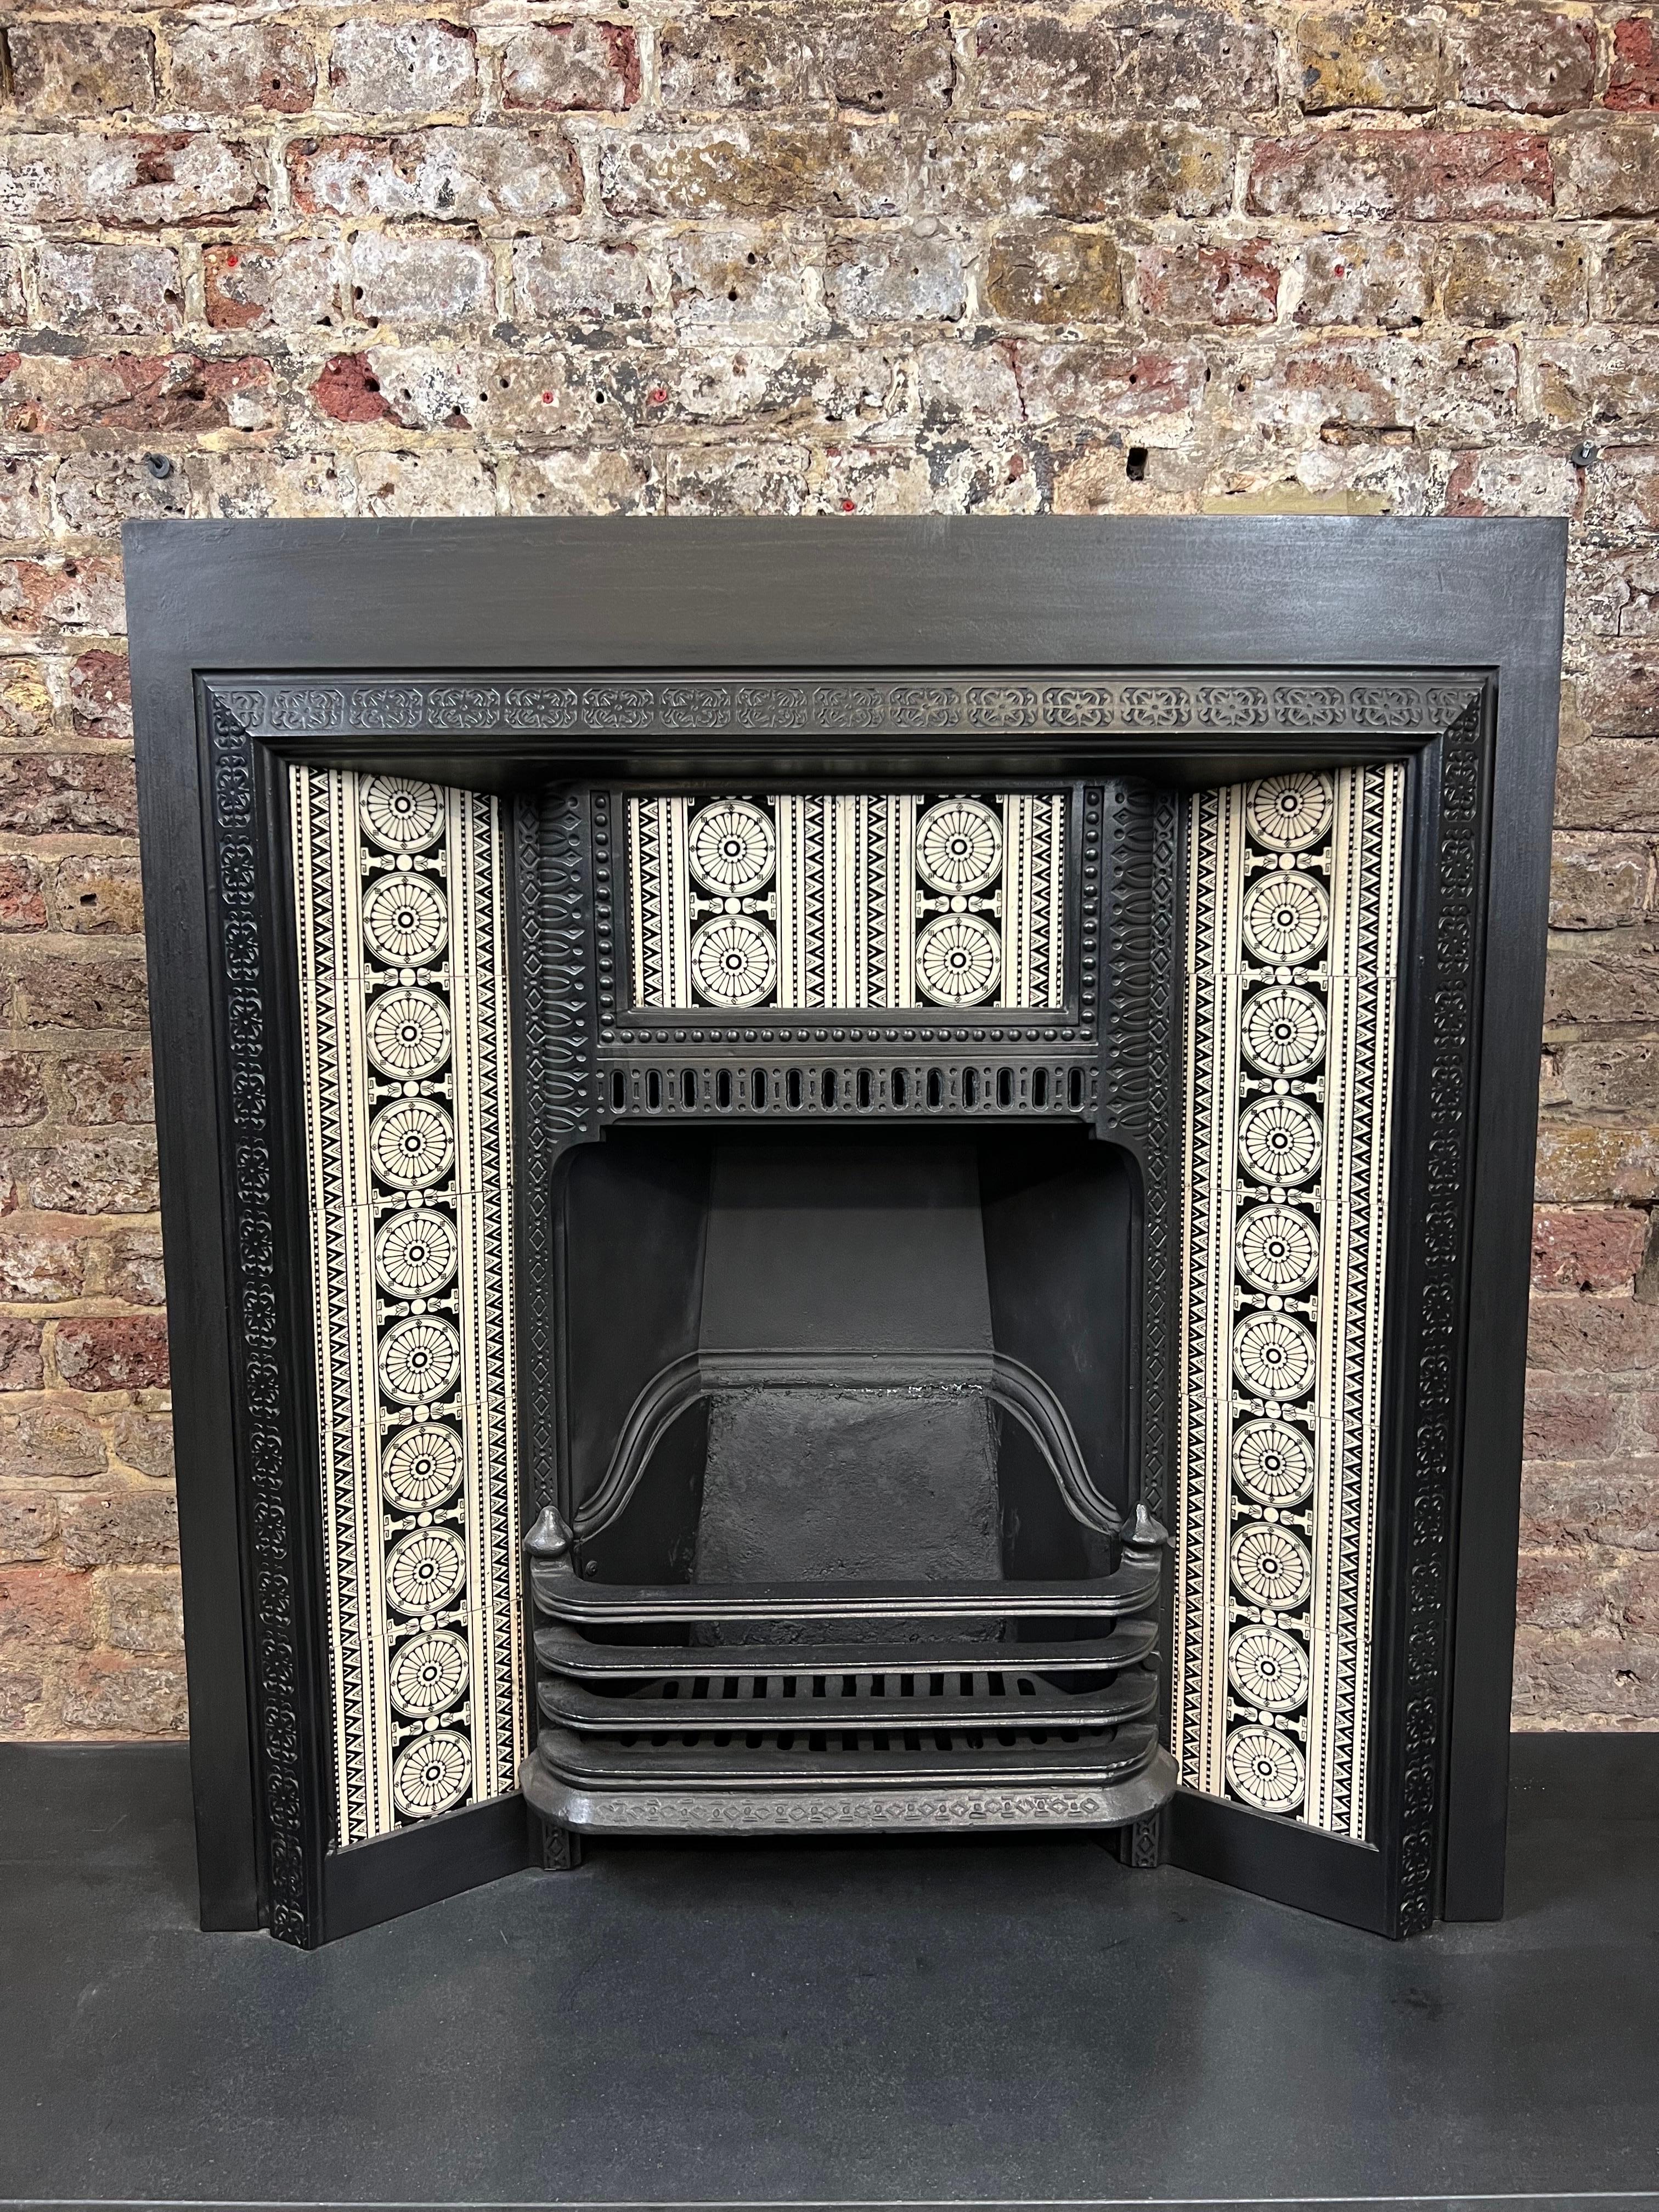 19th Century Cast-iron Fireplace Insert With Minton Tiles.
A Very Fine & Rare Example Of Such Quality. Perfectly Depicting A True Reflection Of Quality Craftsmanship During The Victorian Period. 
This Excellent Fireplace Recently Salvaged From A